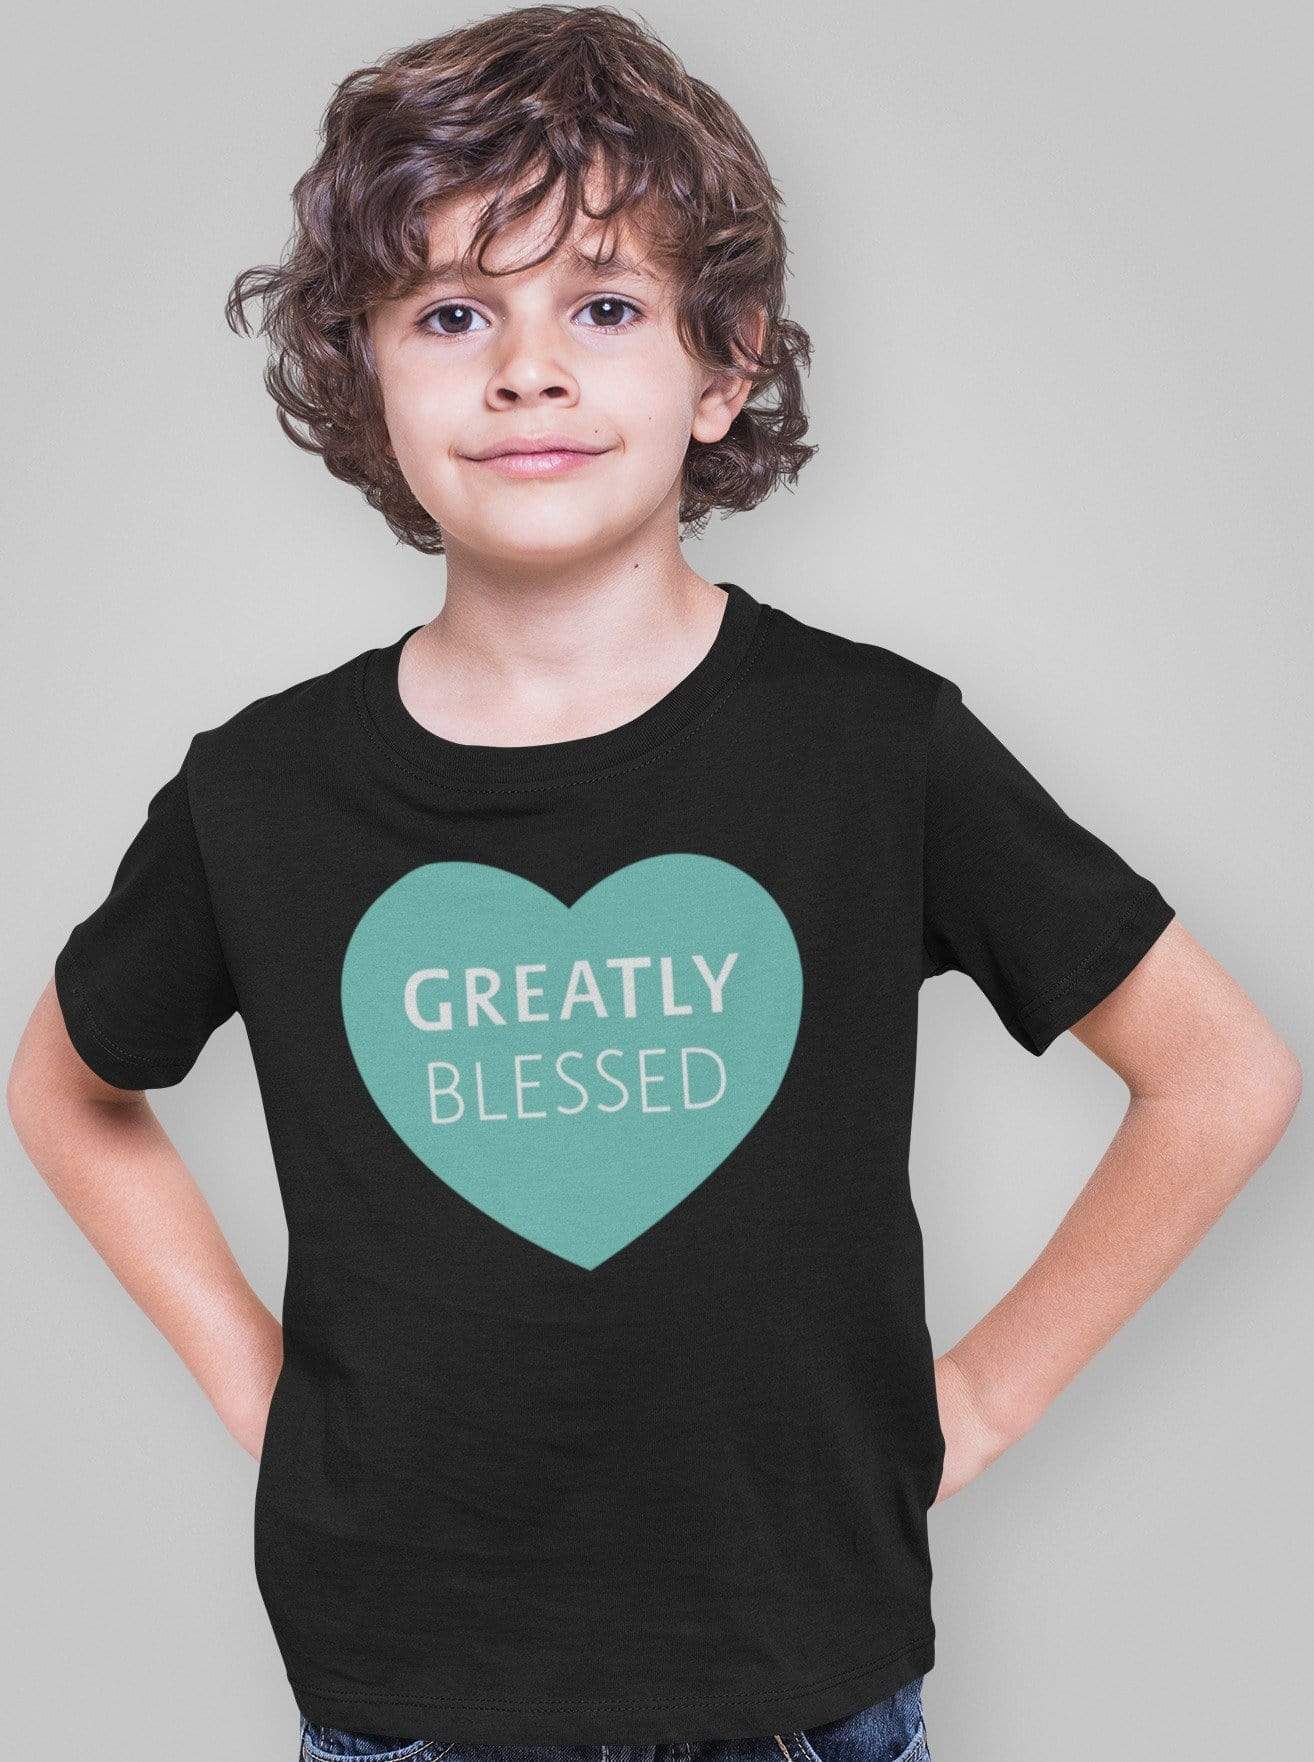 Living Words Boy Round neck Tshirt 0-11M / Black Greatly Blessed